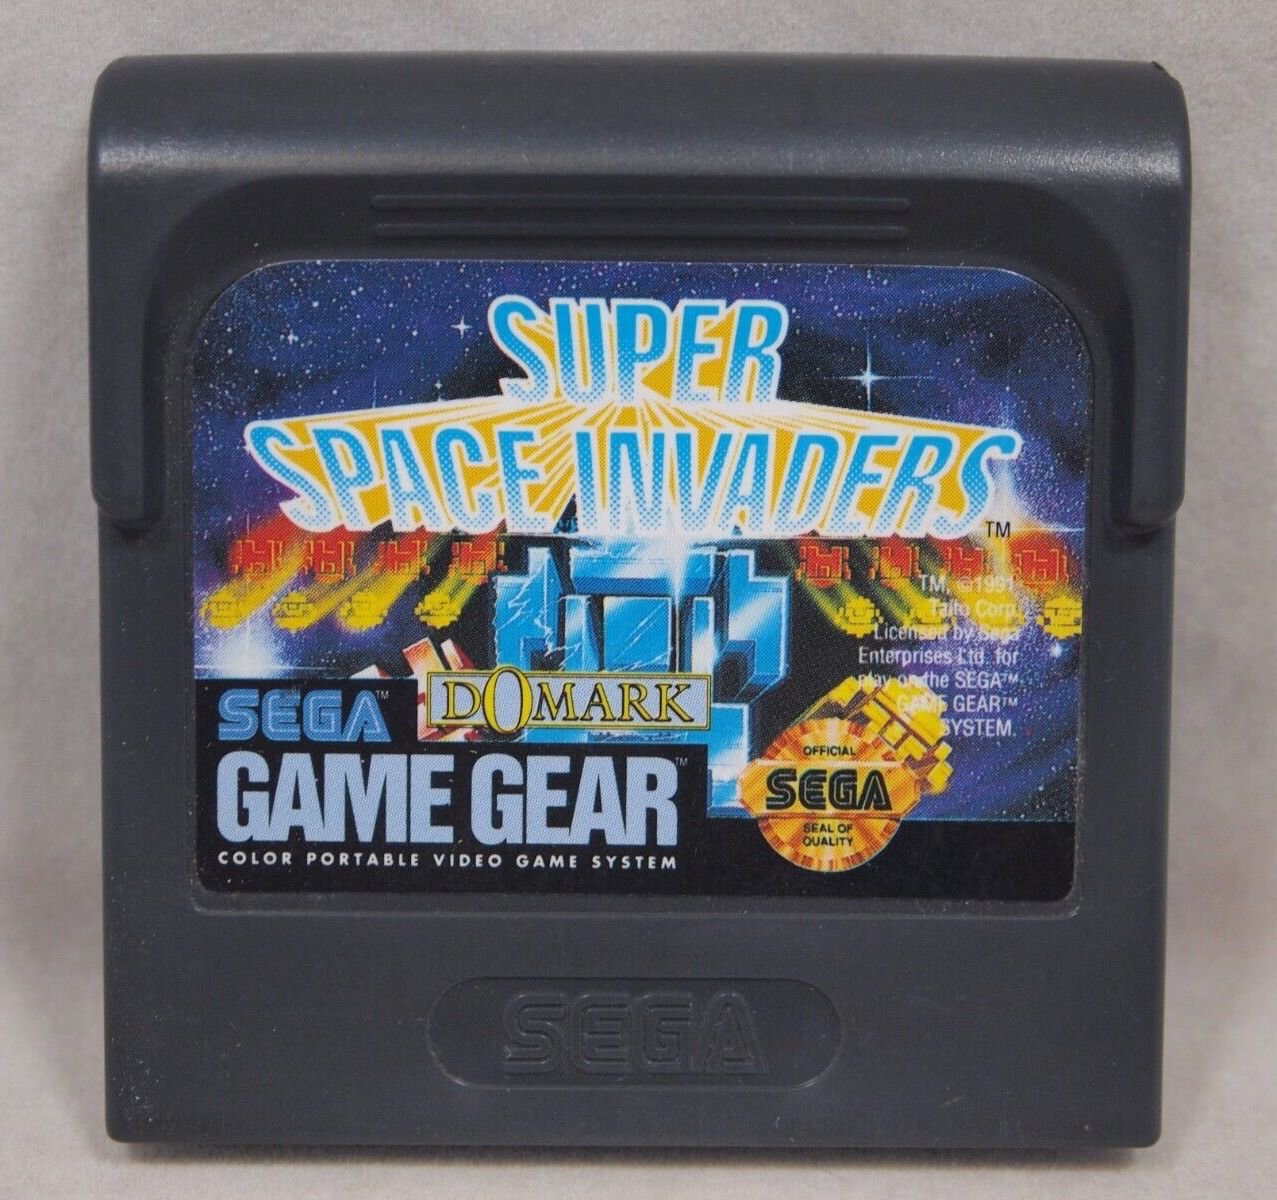 Super Space Invaders - Game Gear